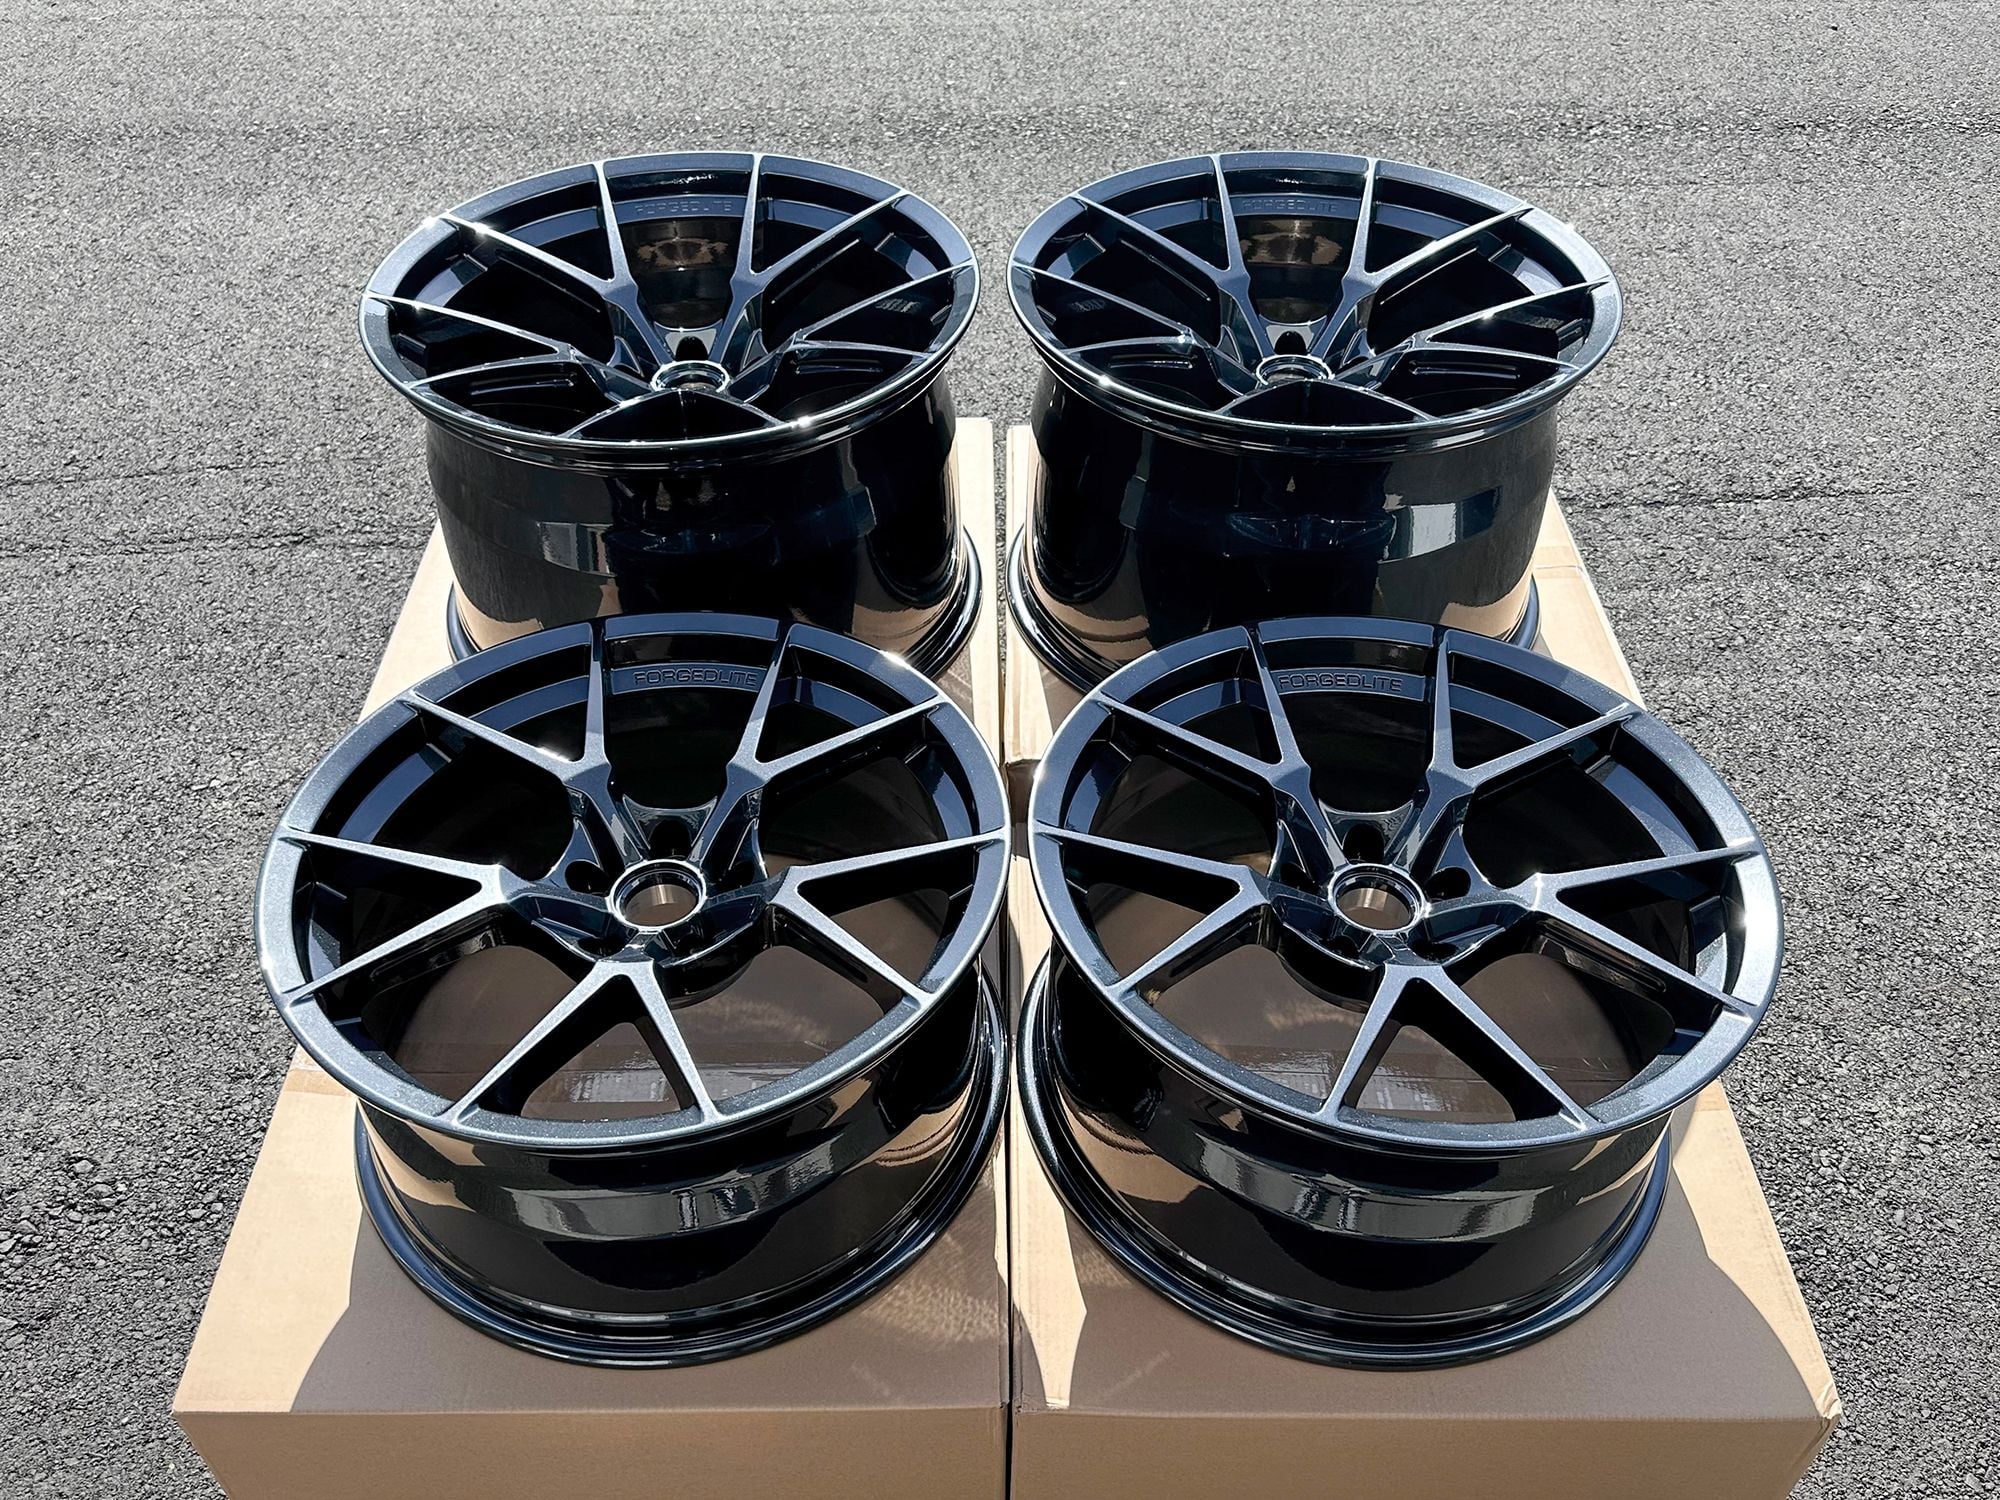 S650 Mustang 19" and 20" Forgedlite Wheels for your S650 Ford Mustang _c8_z06_1_81298623c2db7915482a0b1a61e53dd237c45208